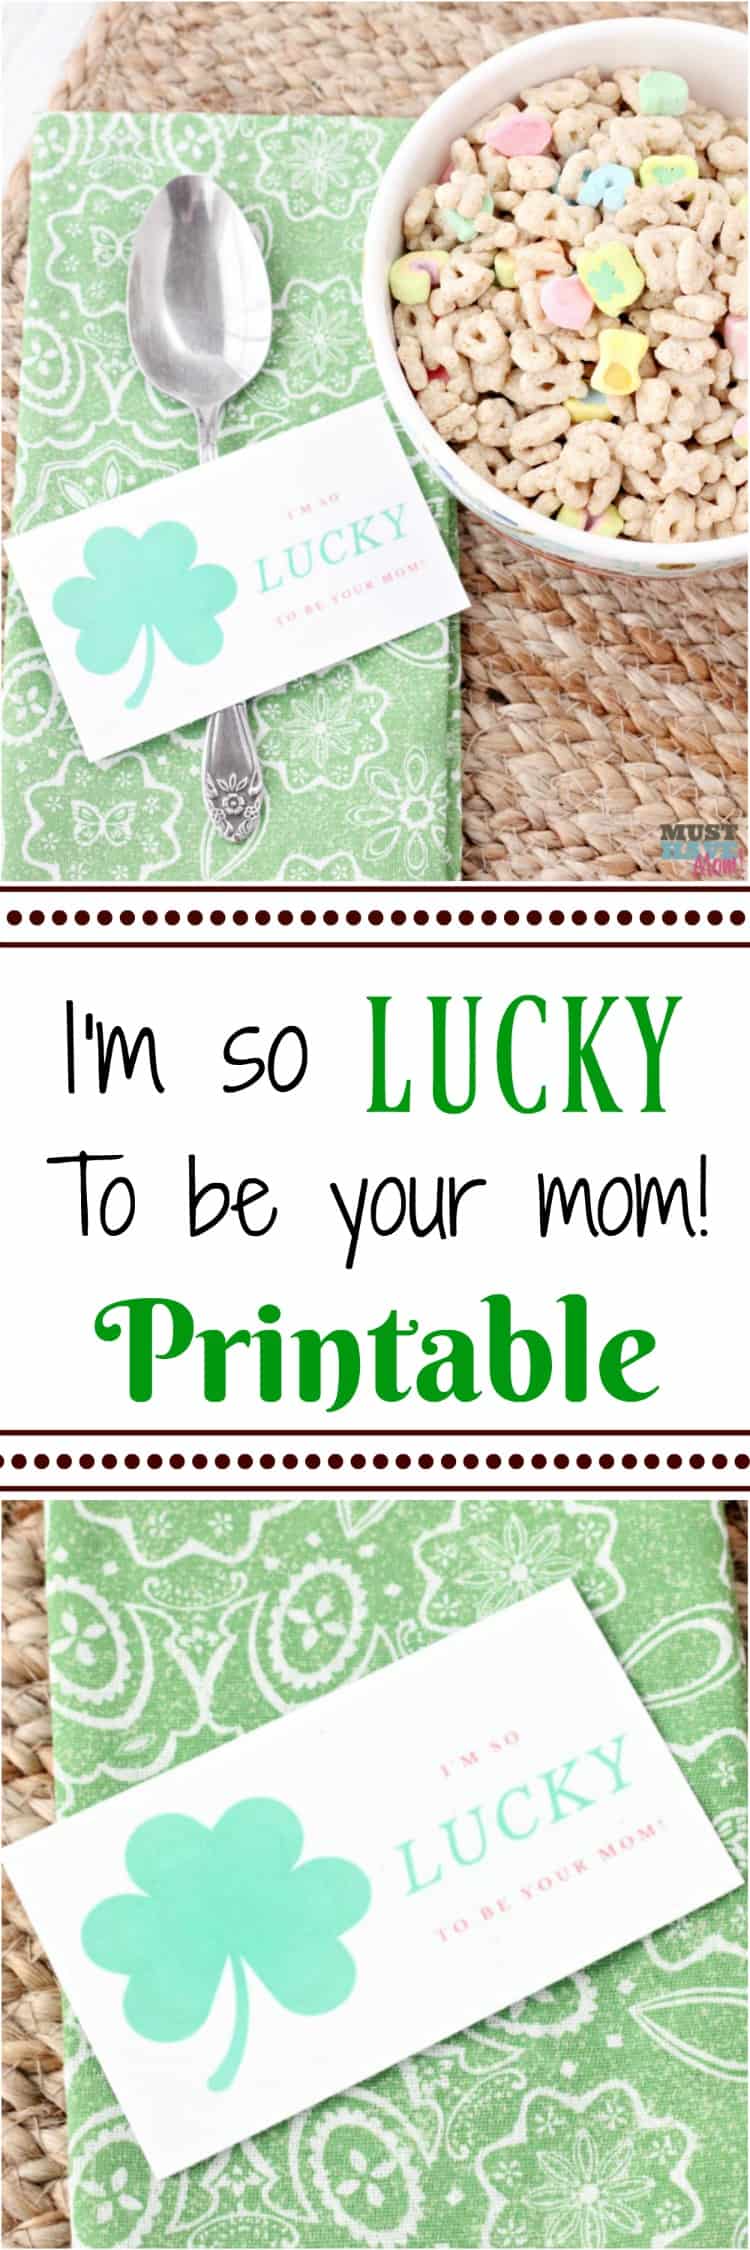 I'm lucky to be your mom free printable! Great for reminding your kids how special they are! Surprise them with a note at breakfast!